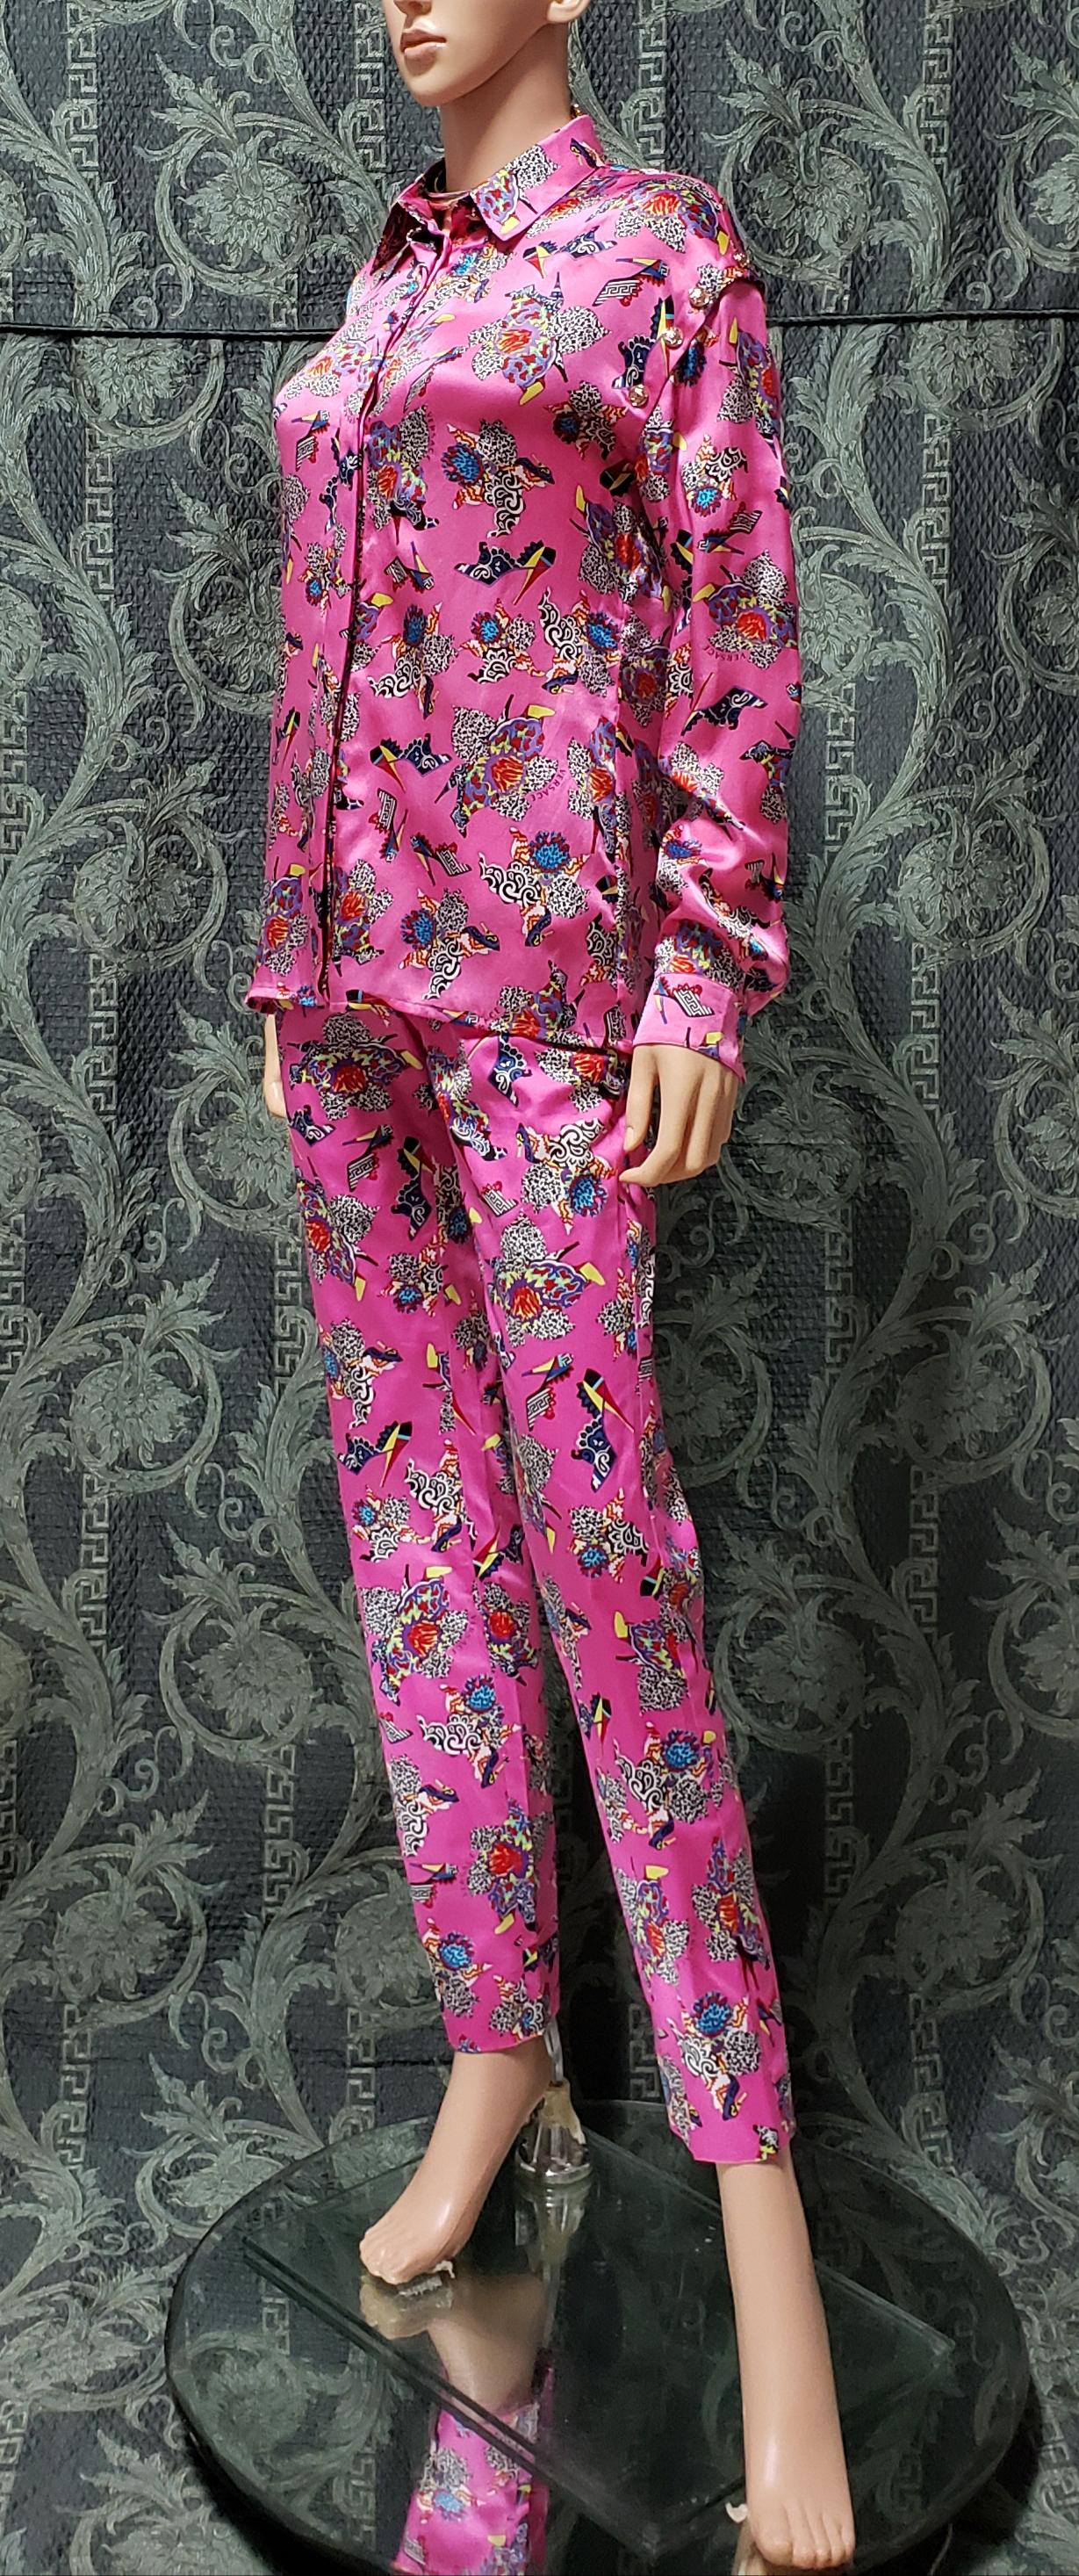 Resort 2013 Look # 8 NEW VERSACE ICONIC PRINT SILK and COTTON PANT SUIT 38 - 2 For Sale 1